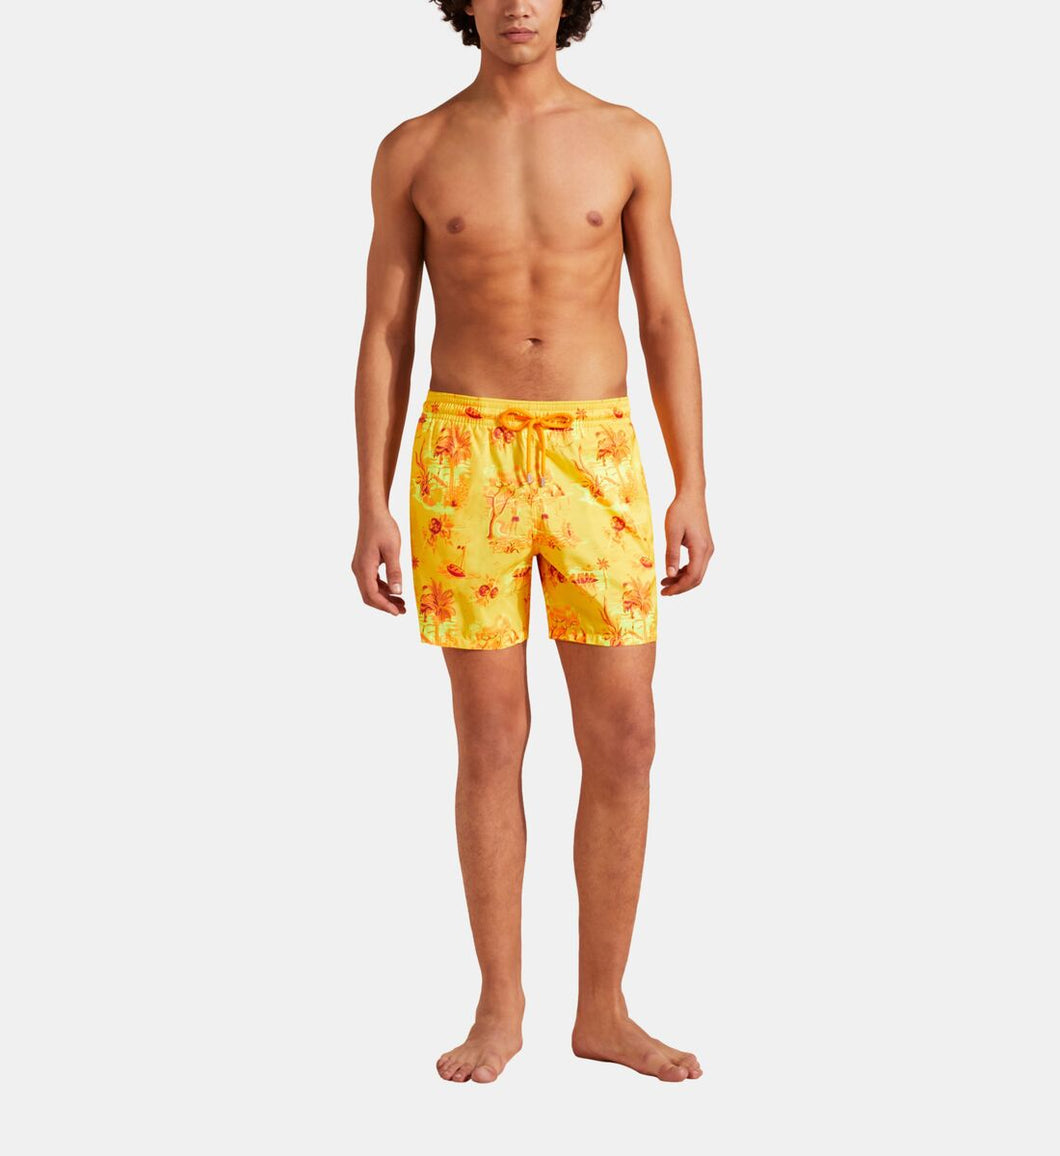 Men Ultra-Light and Packable Swim Trunks Toile de Jouy and Surf